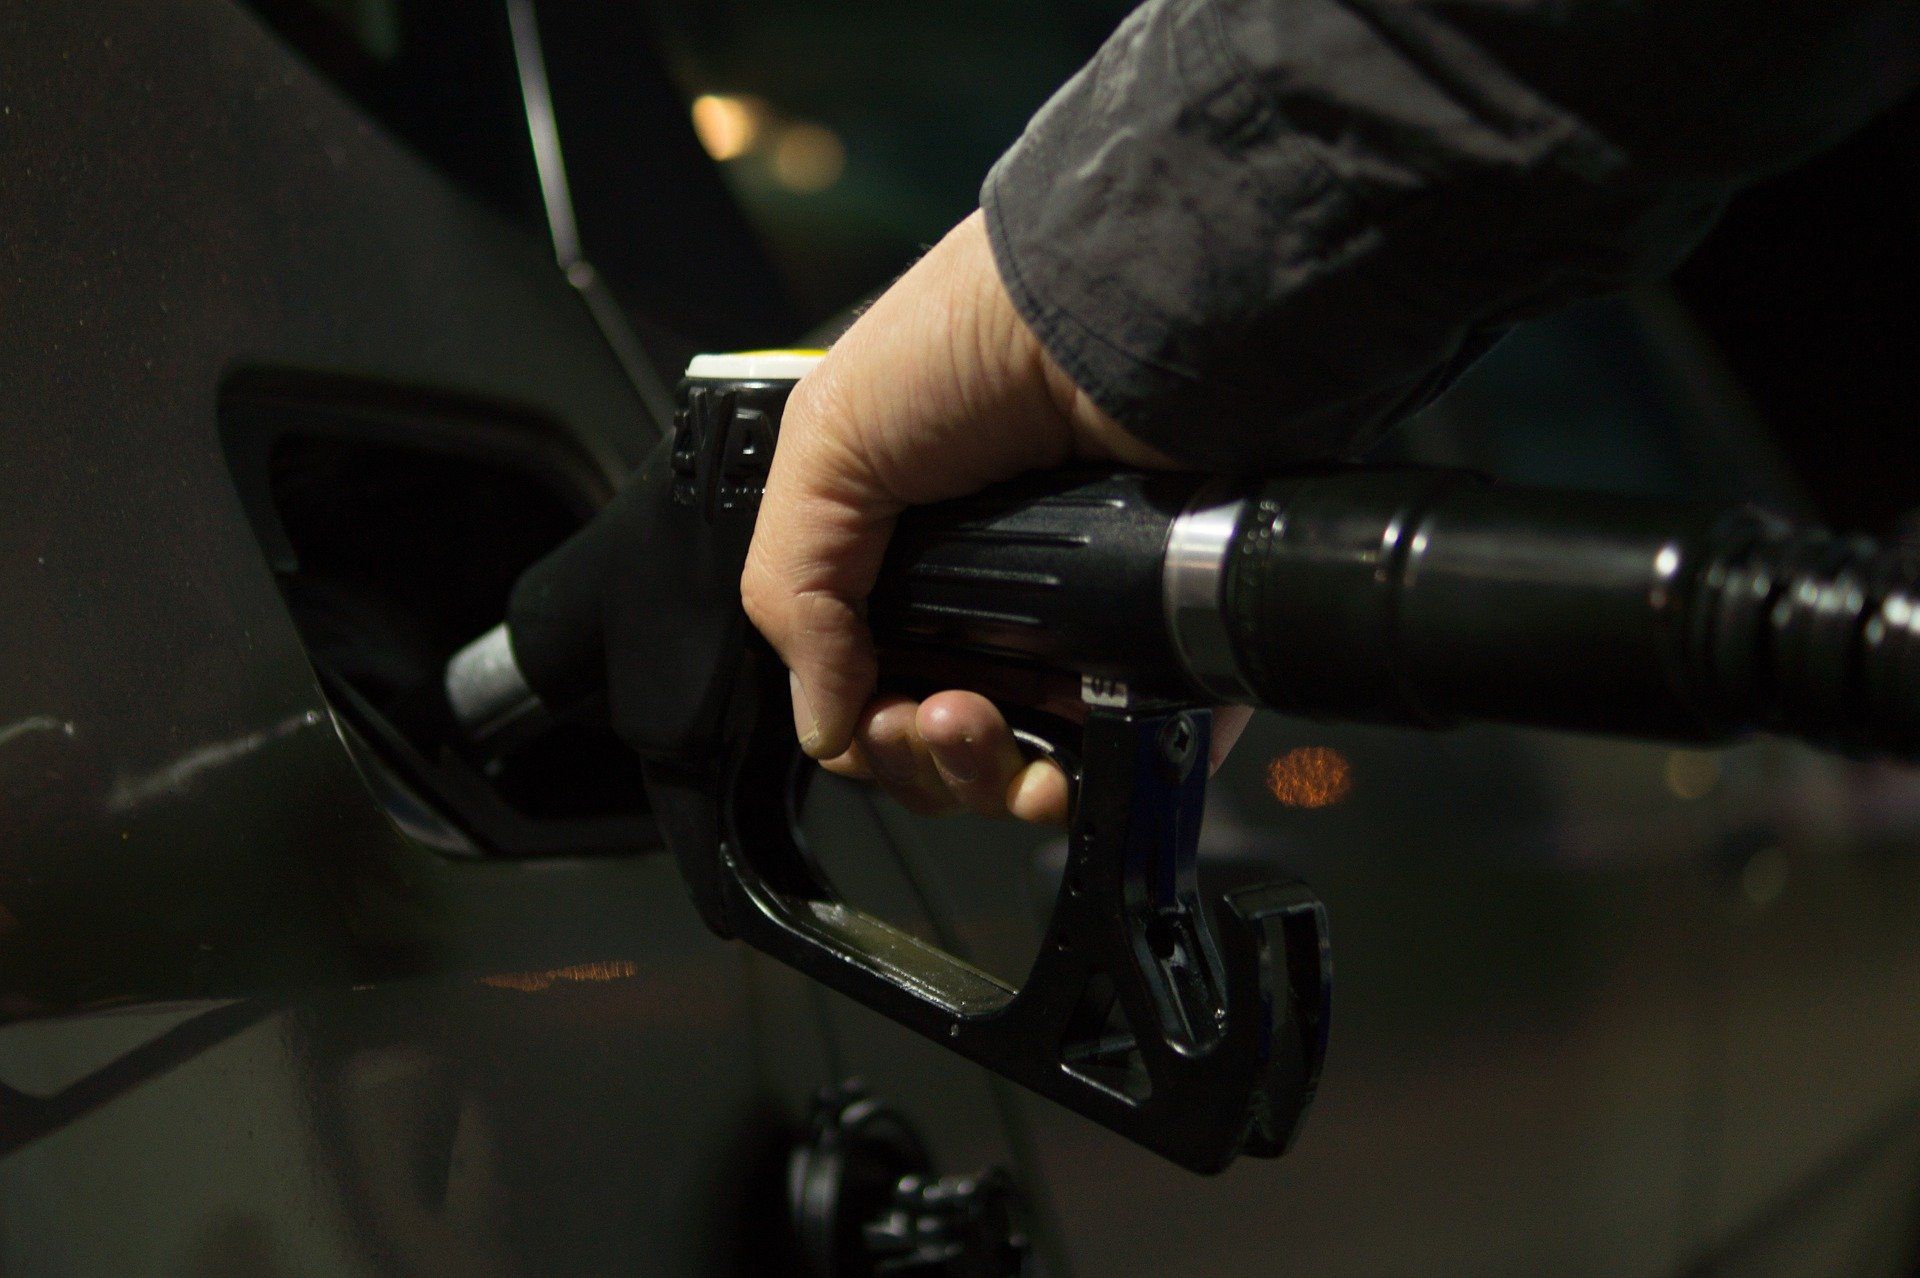 Fuel price today: Petrol and Diesel rates remain unchanged on May 17, 2022